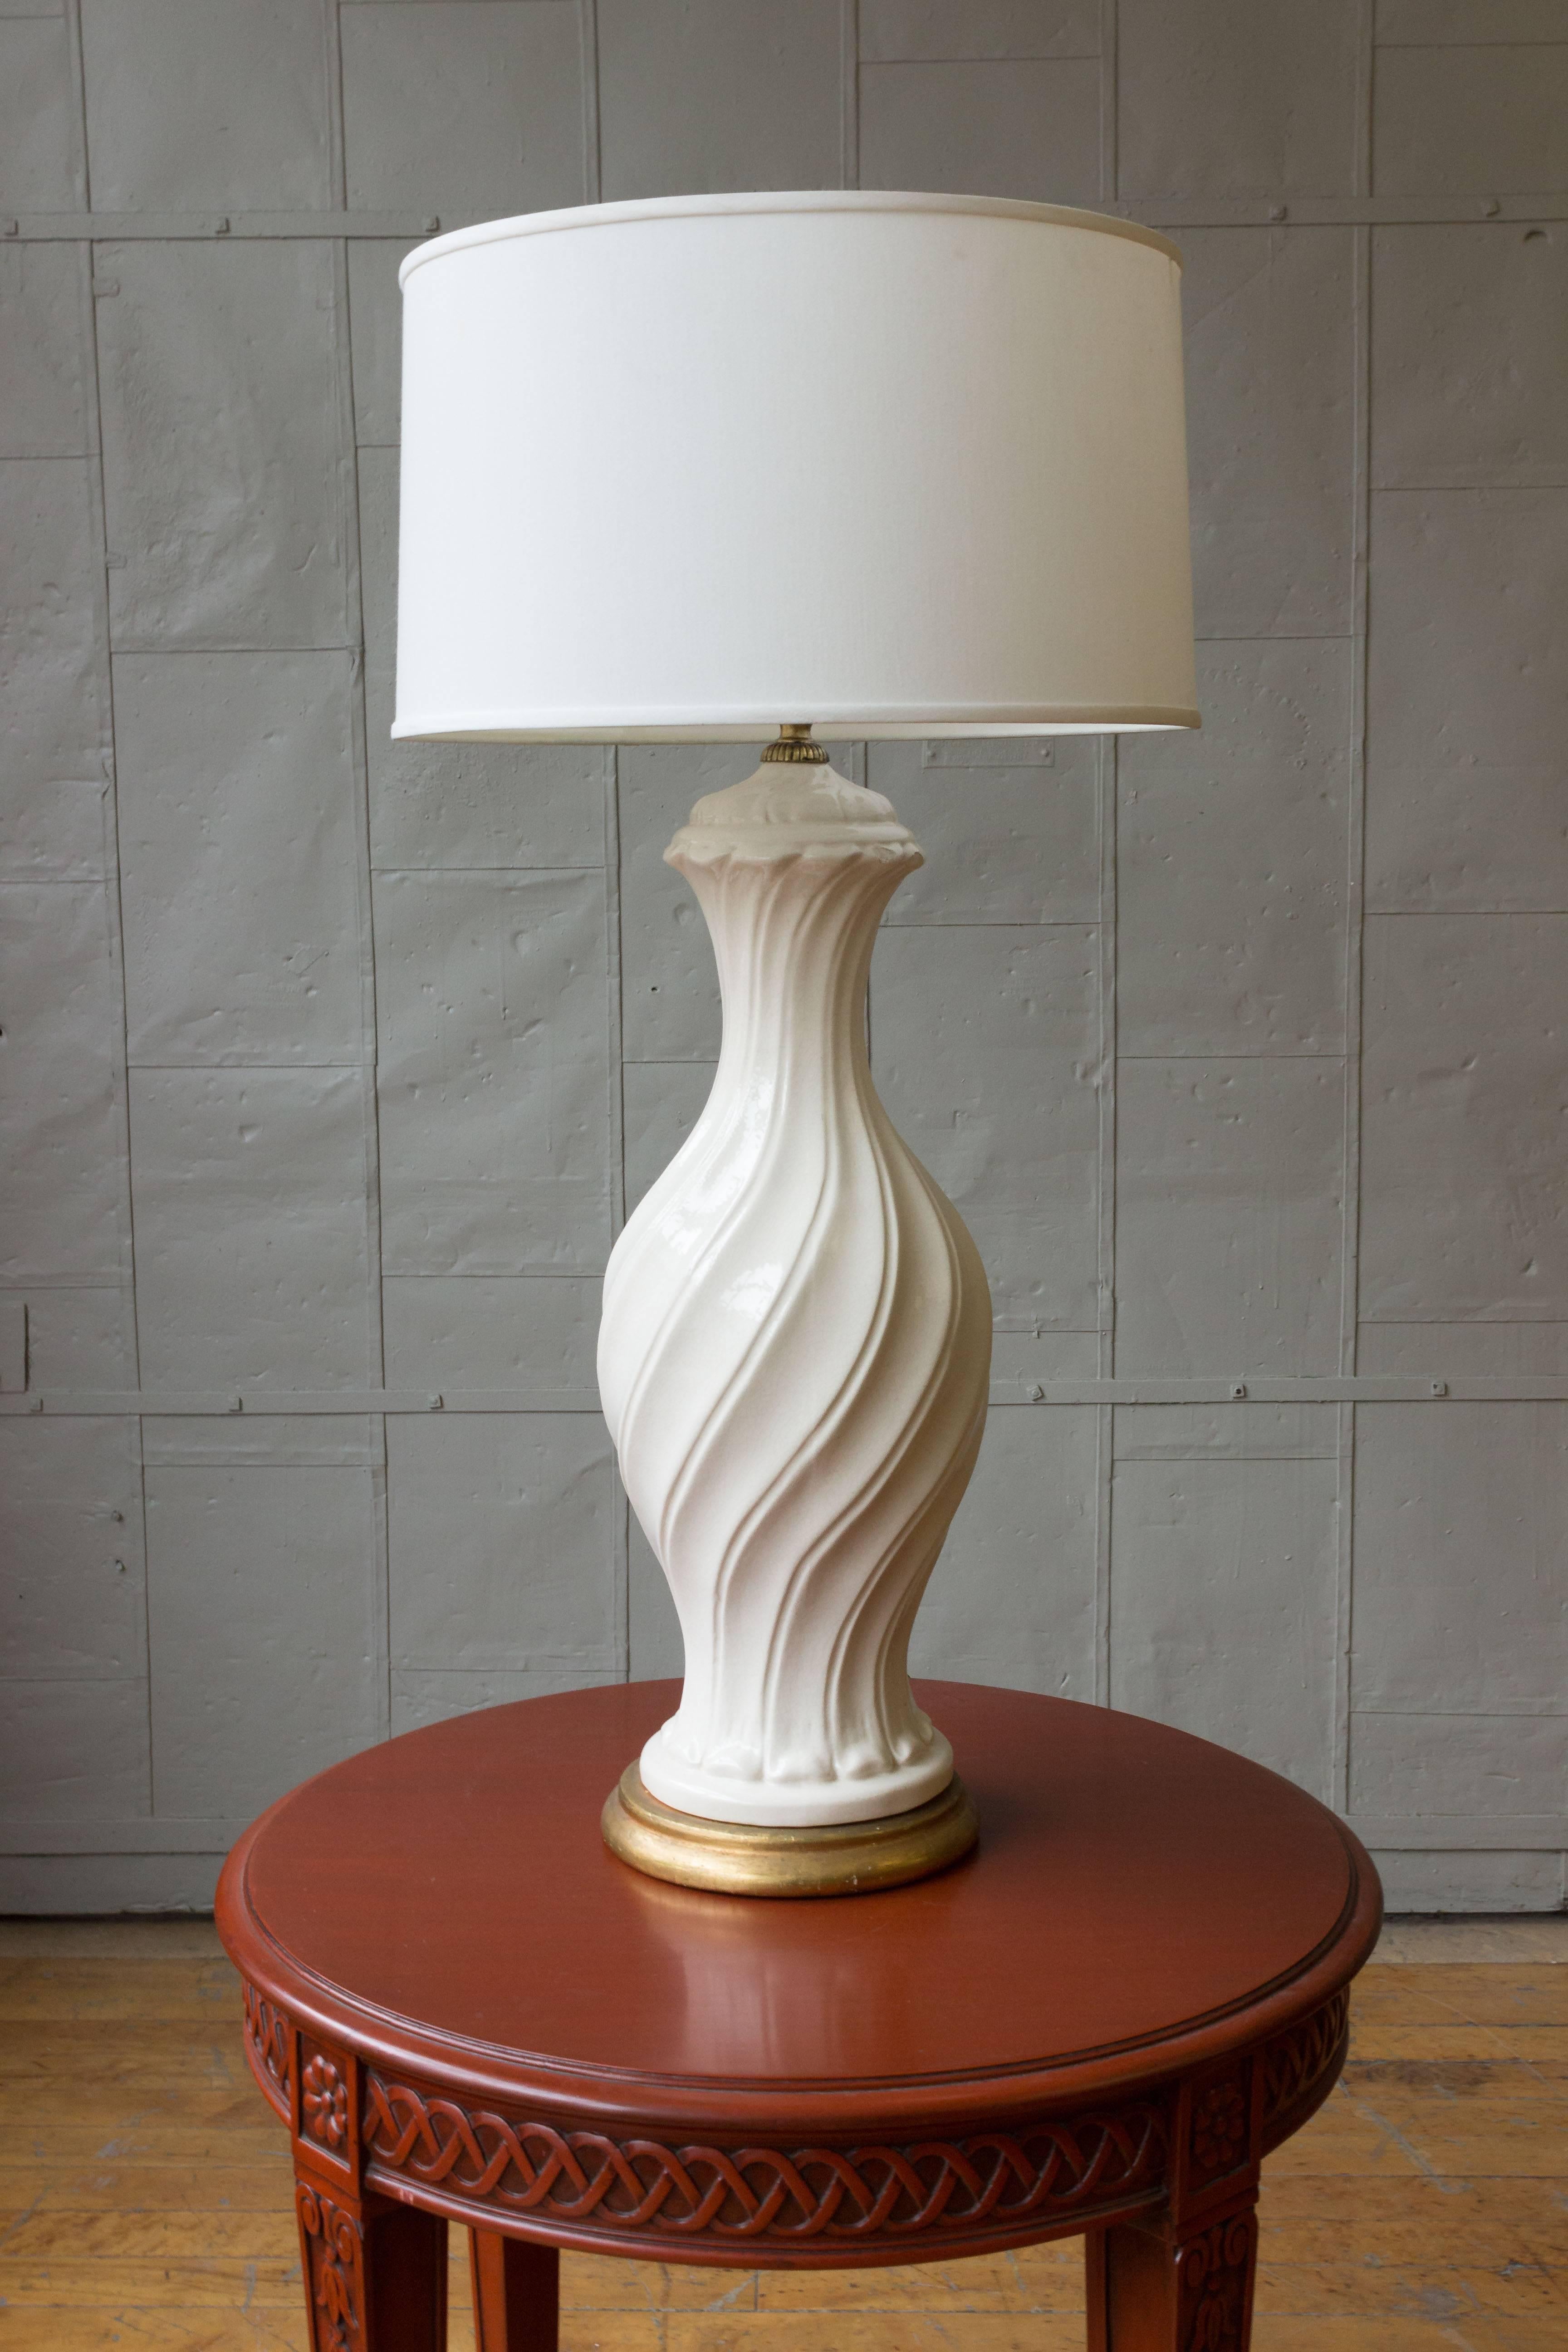 This Spanish 1950s oversized white ceramic lamp with crackle glaze and an antique gold base will bring a stylish and elegant look to any living space. With its size and lovely swirl design, this lamp is sure to make a statement. Despite being in